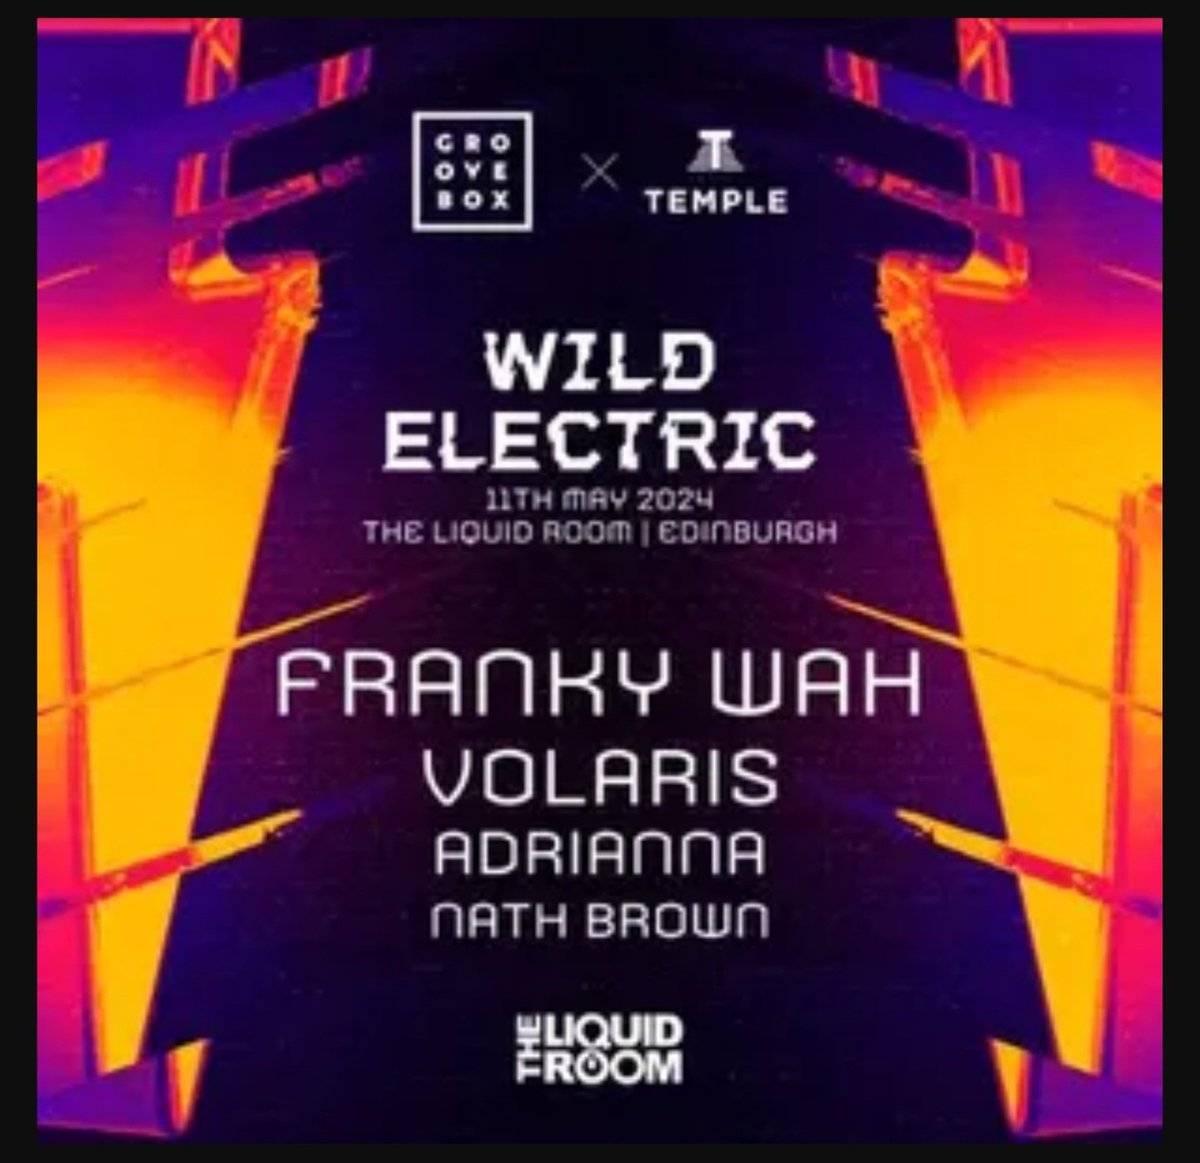 Temple House Music presents ... Groovebox X Temple: Wild Electric with Franky Wah @LIQUIDROOMS/ 11th May Tickets right here 🎟 t-s.co/gro09